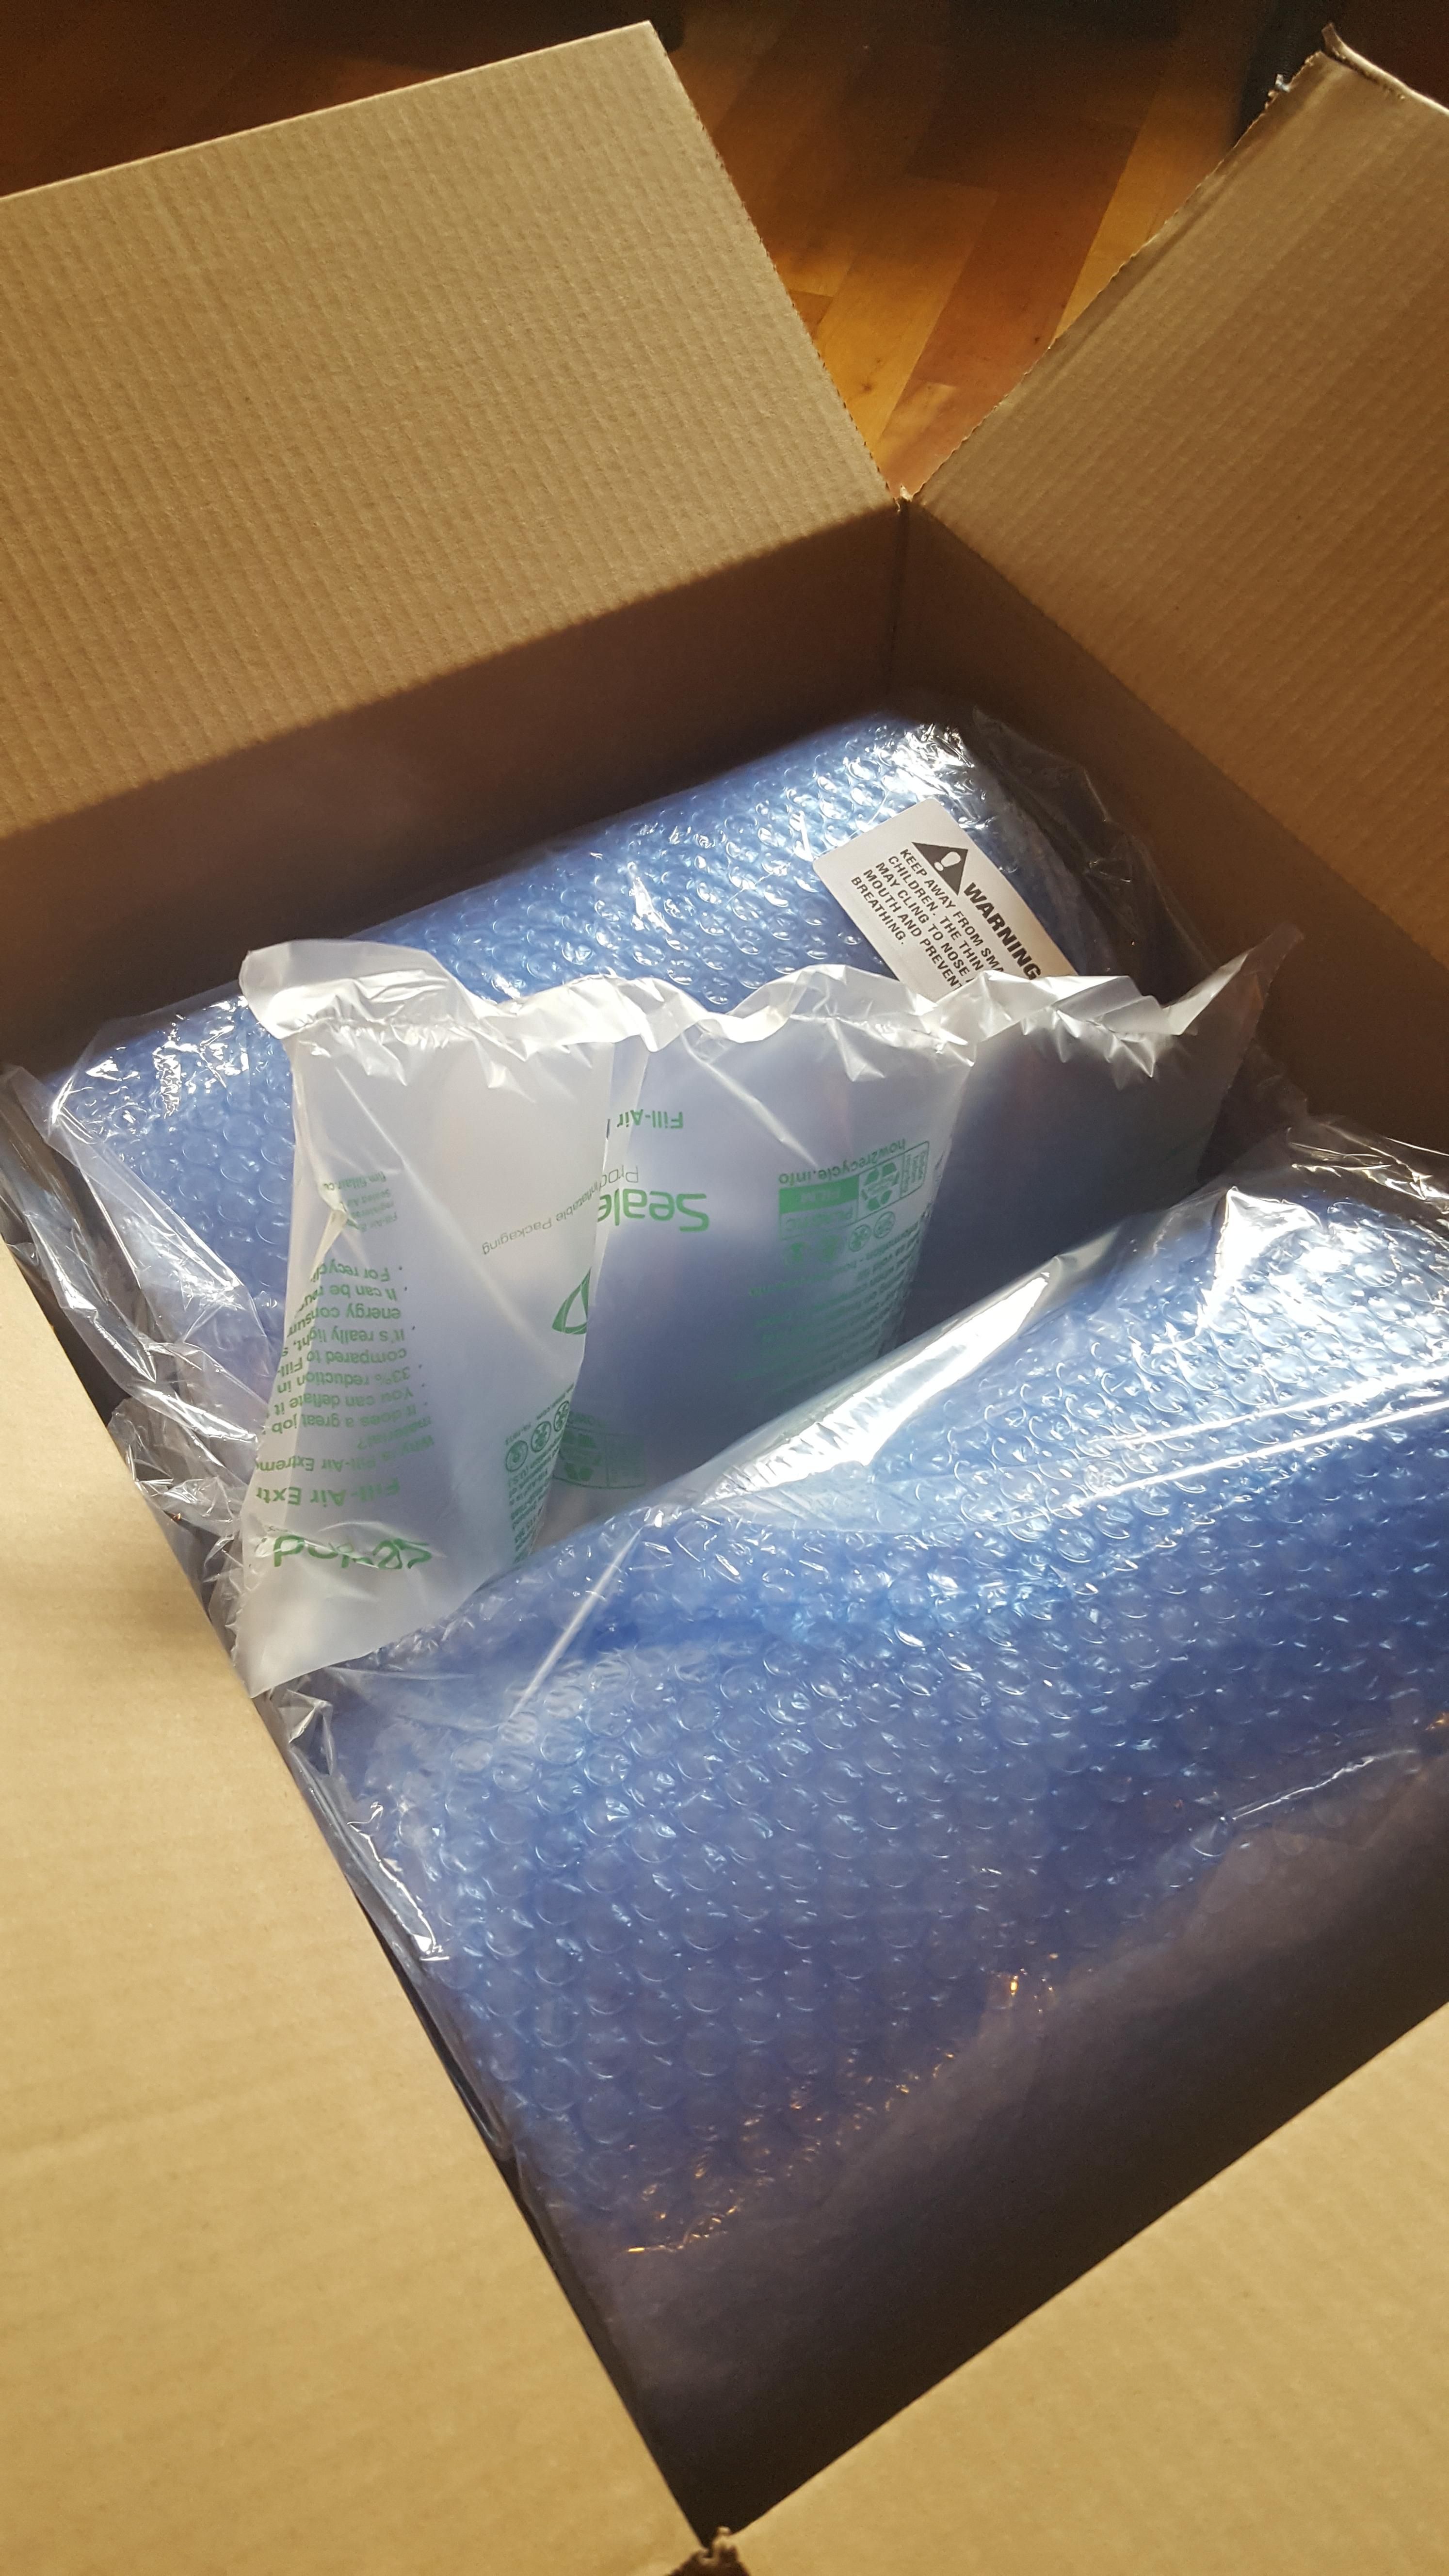 Gotta love those Amazon warehouse robots. Ordered bubble wrap. Came packaged in bubble wrap.